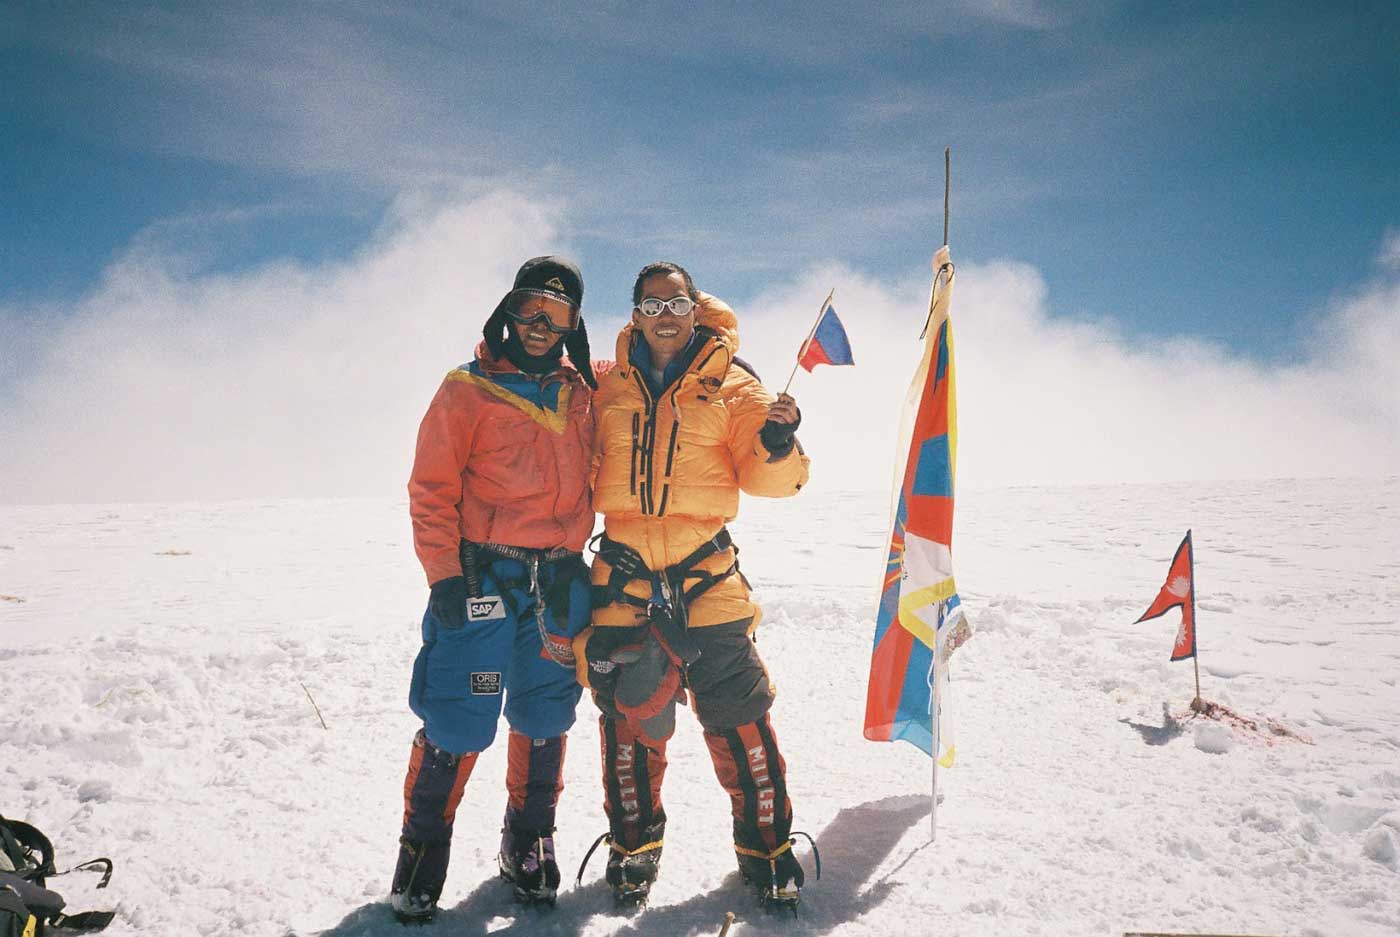 Romi (right) with Lhakpa Rangdu Sherpa at the summit of Mt. Cho Oyu, 2005  